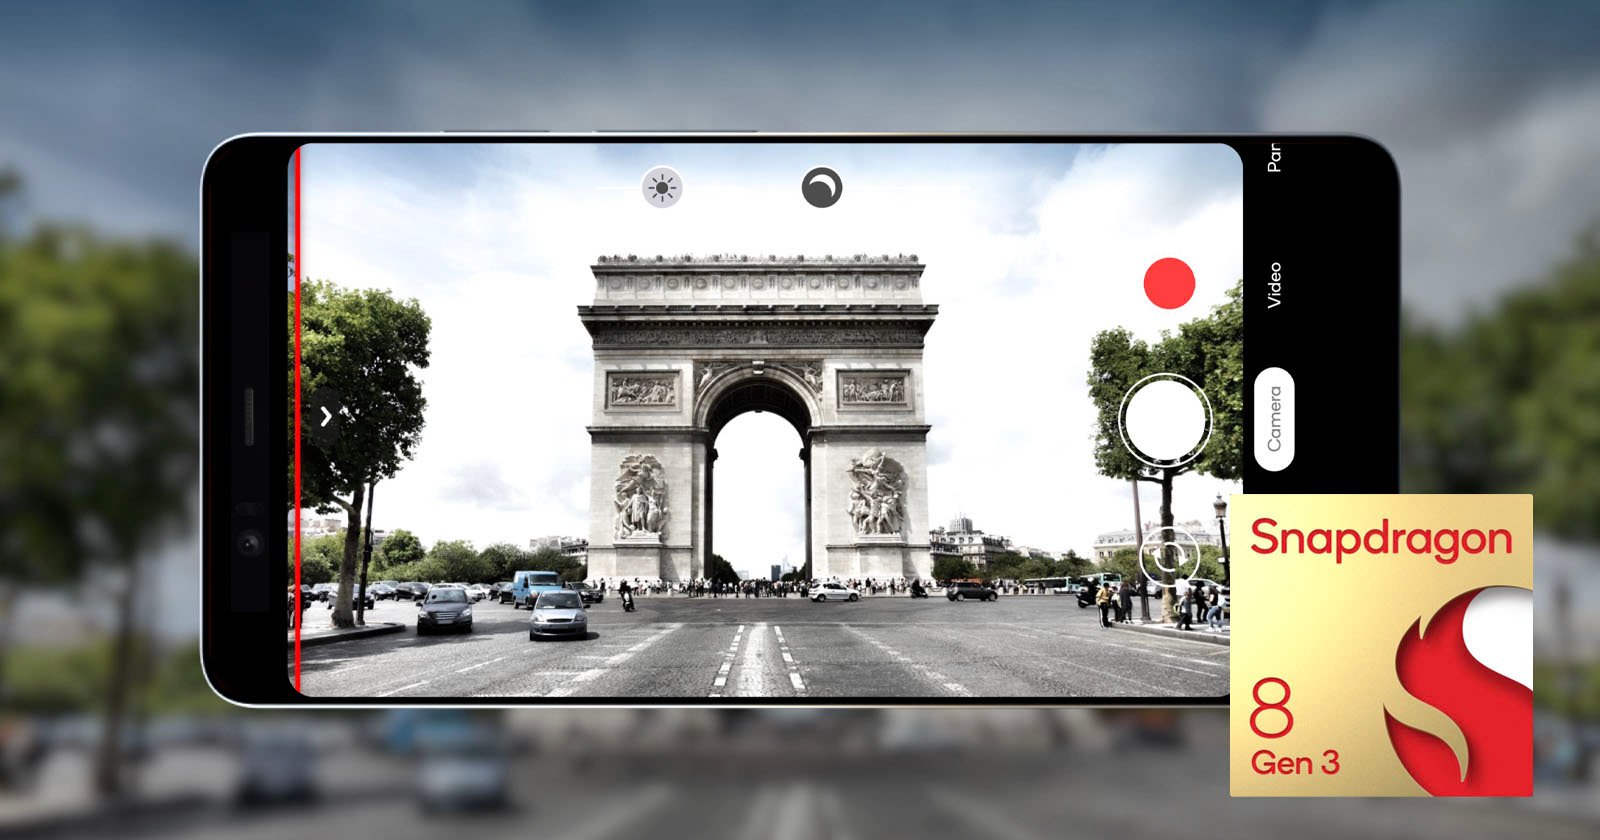  snapdragon gen uses add photo video 